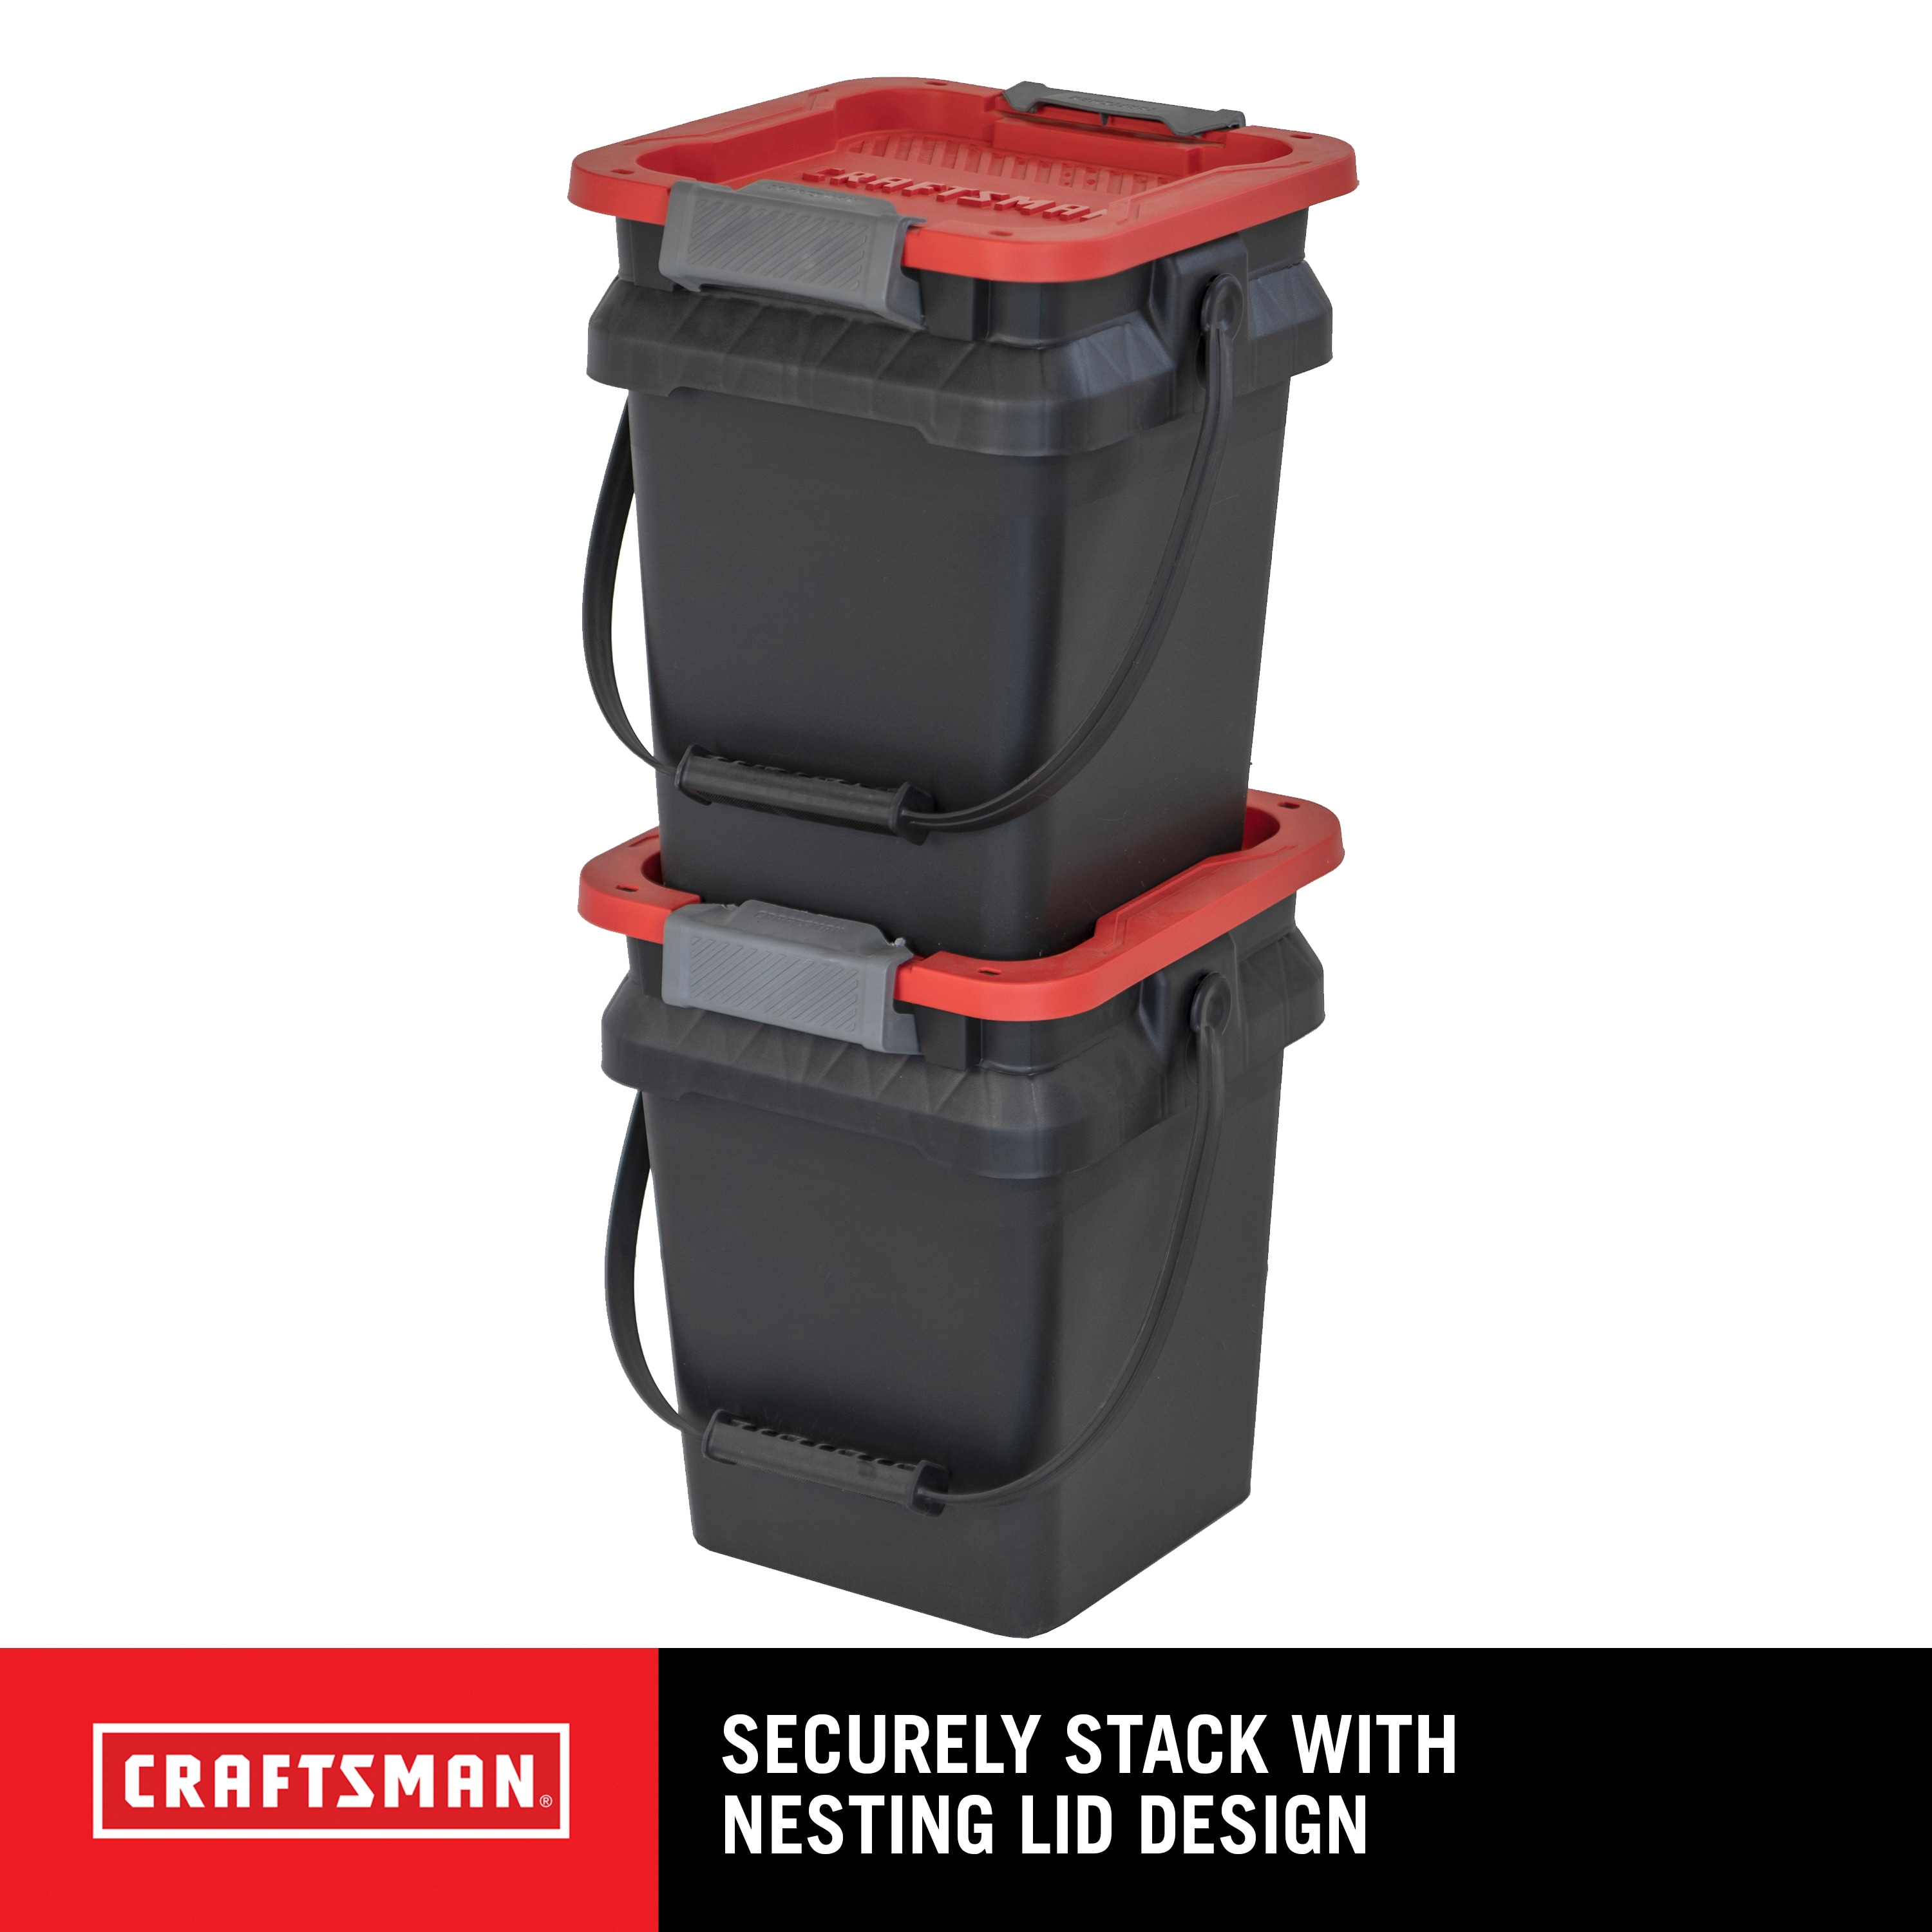 2 NEW 5 Gallon Stackable Bucket Organizers W 4 Compartments By Tool Shop